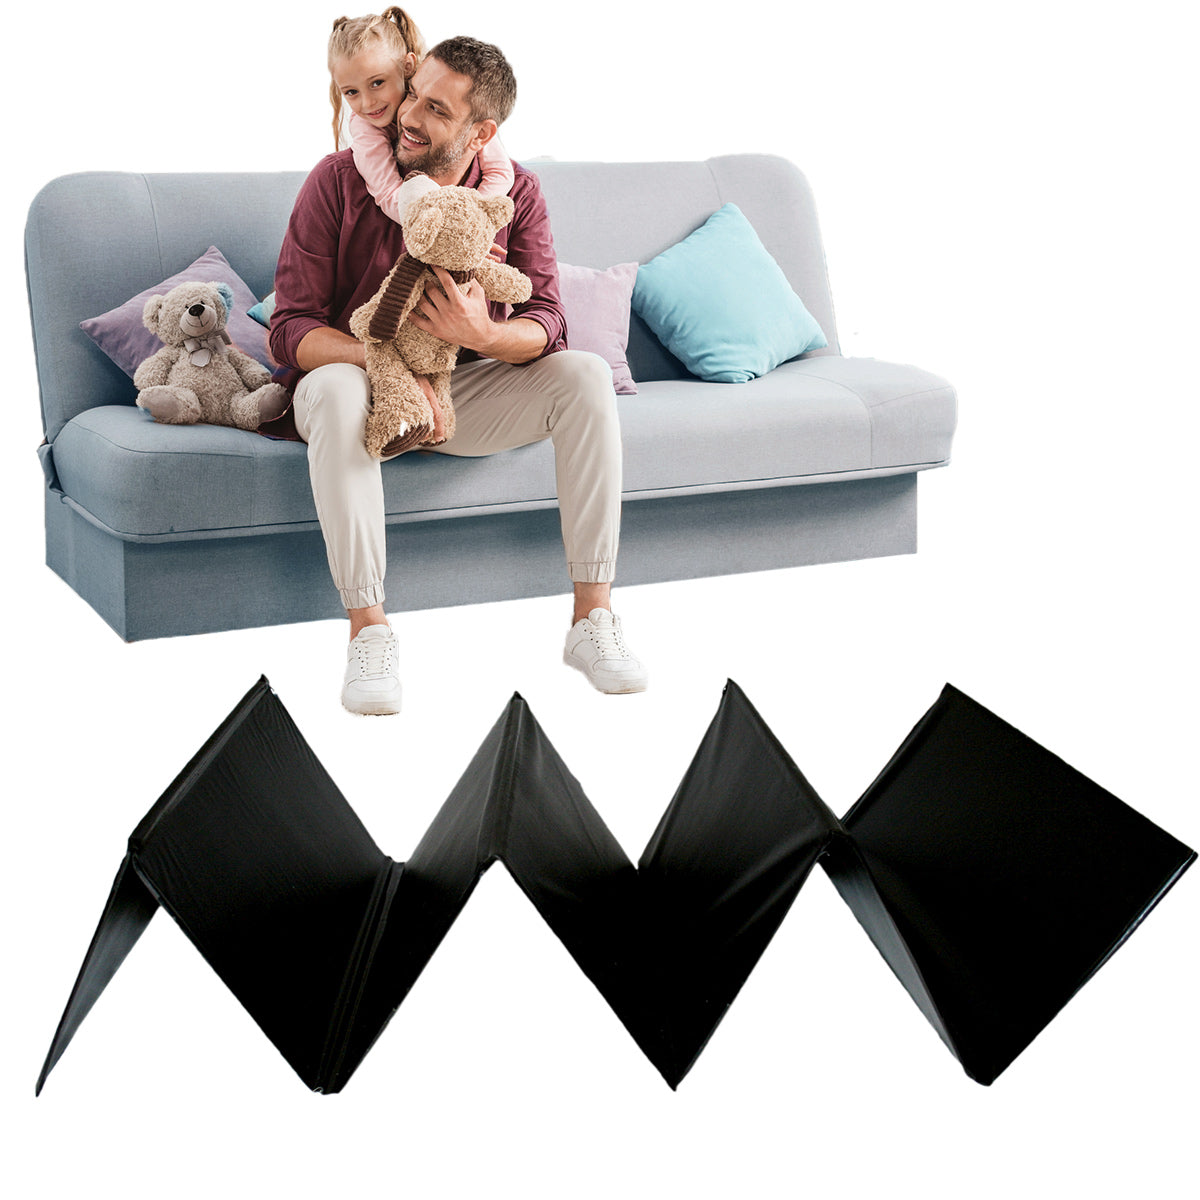 LAMINET Deluxe Extra Thick Sagging Furniture Cushion Support Insert| Seat Saver| New and Improved| Extend The Life of Your Armchair/Recliner | 60%